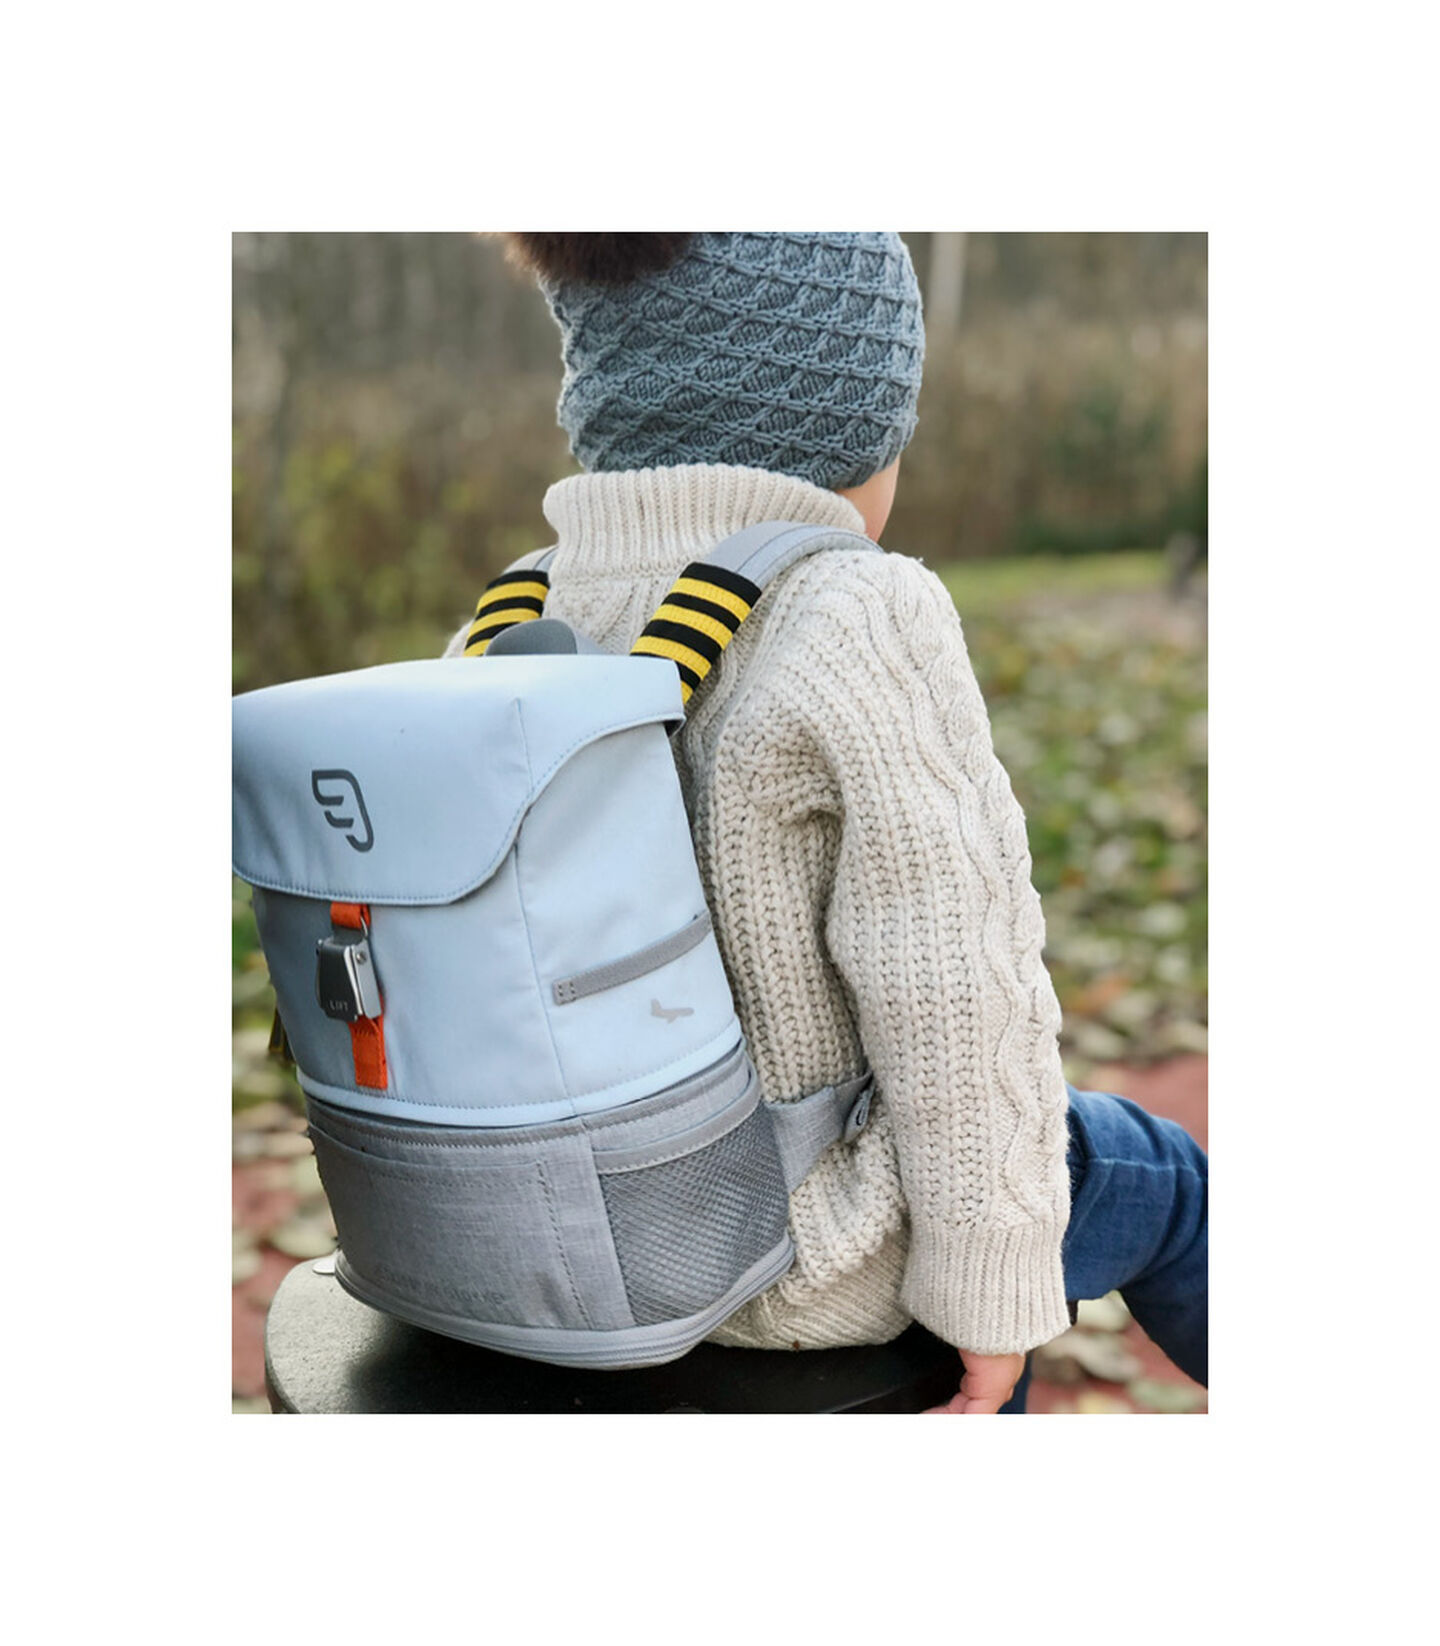 JetKids by Stokke® Crew Backpack White, Biały, mainview view 2